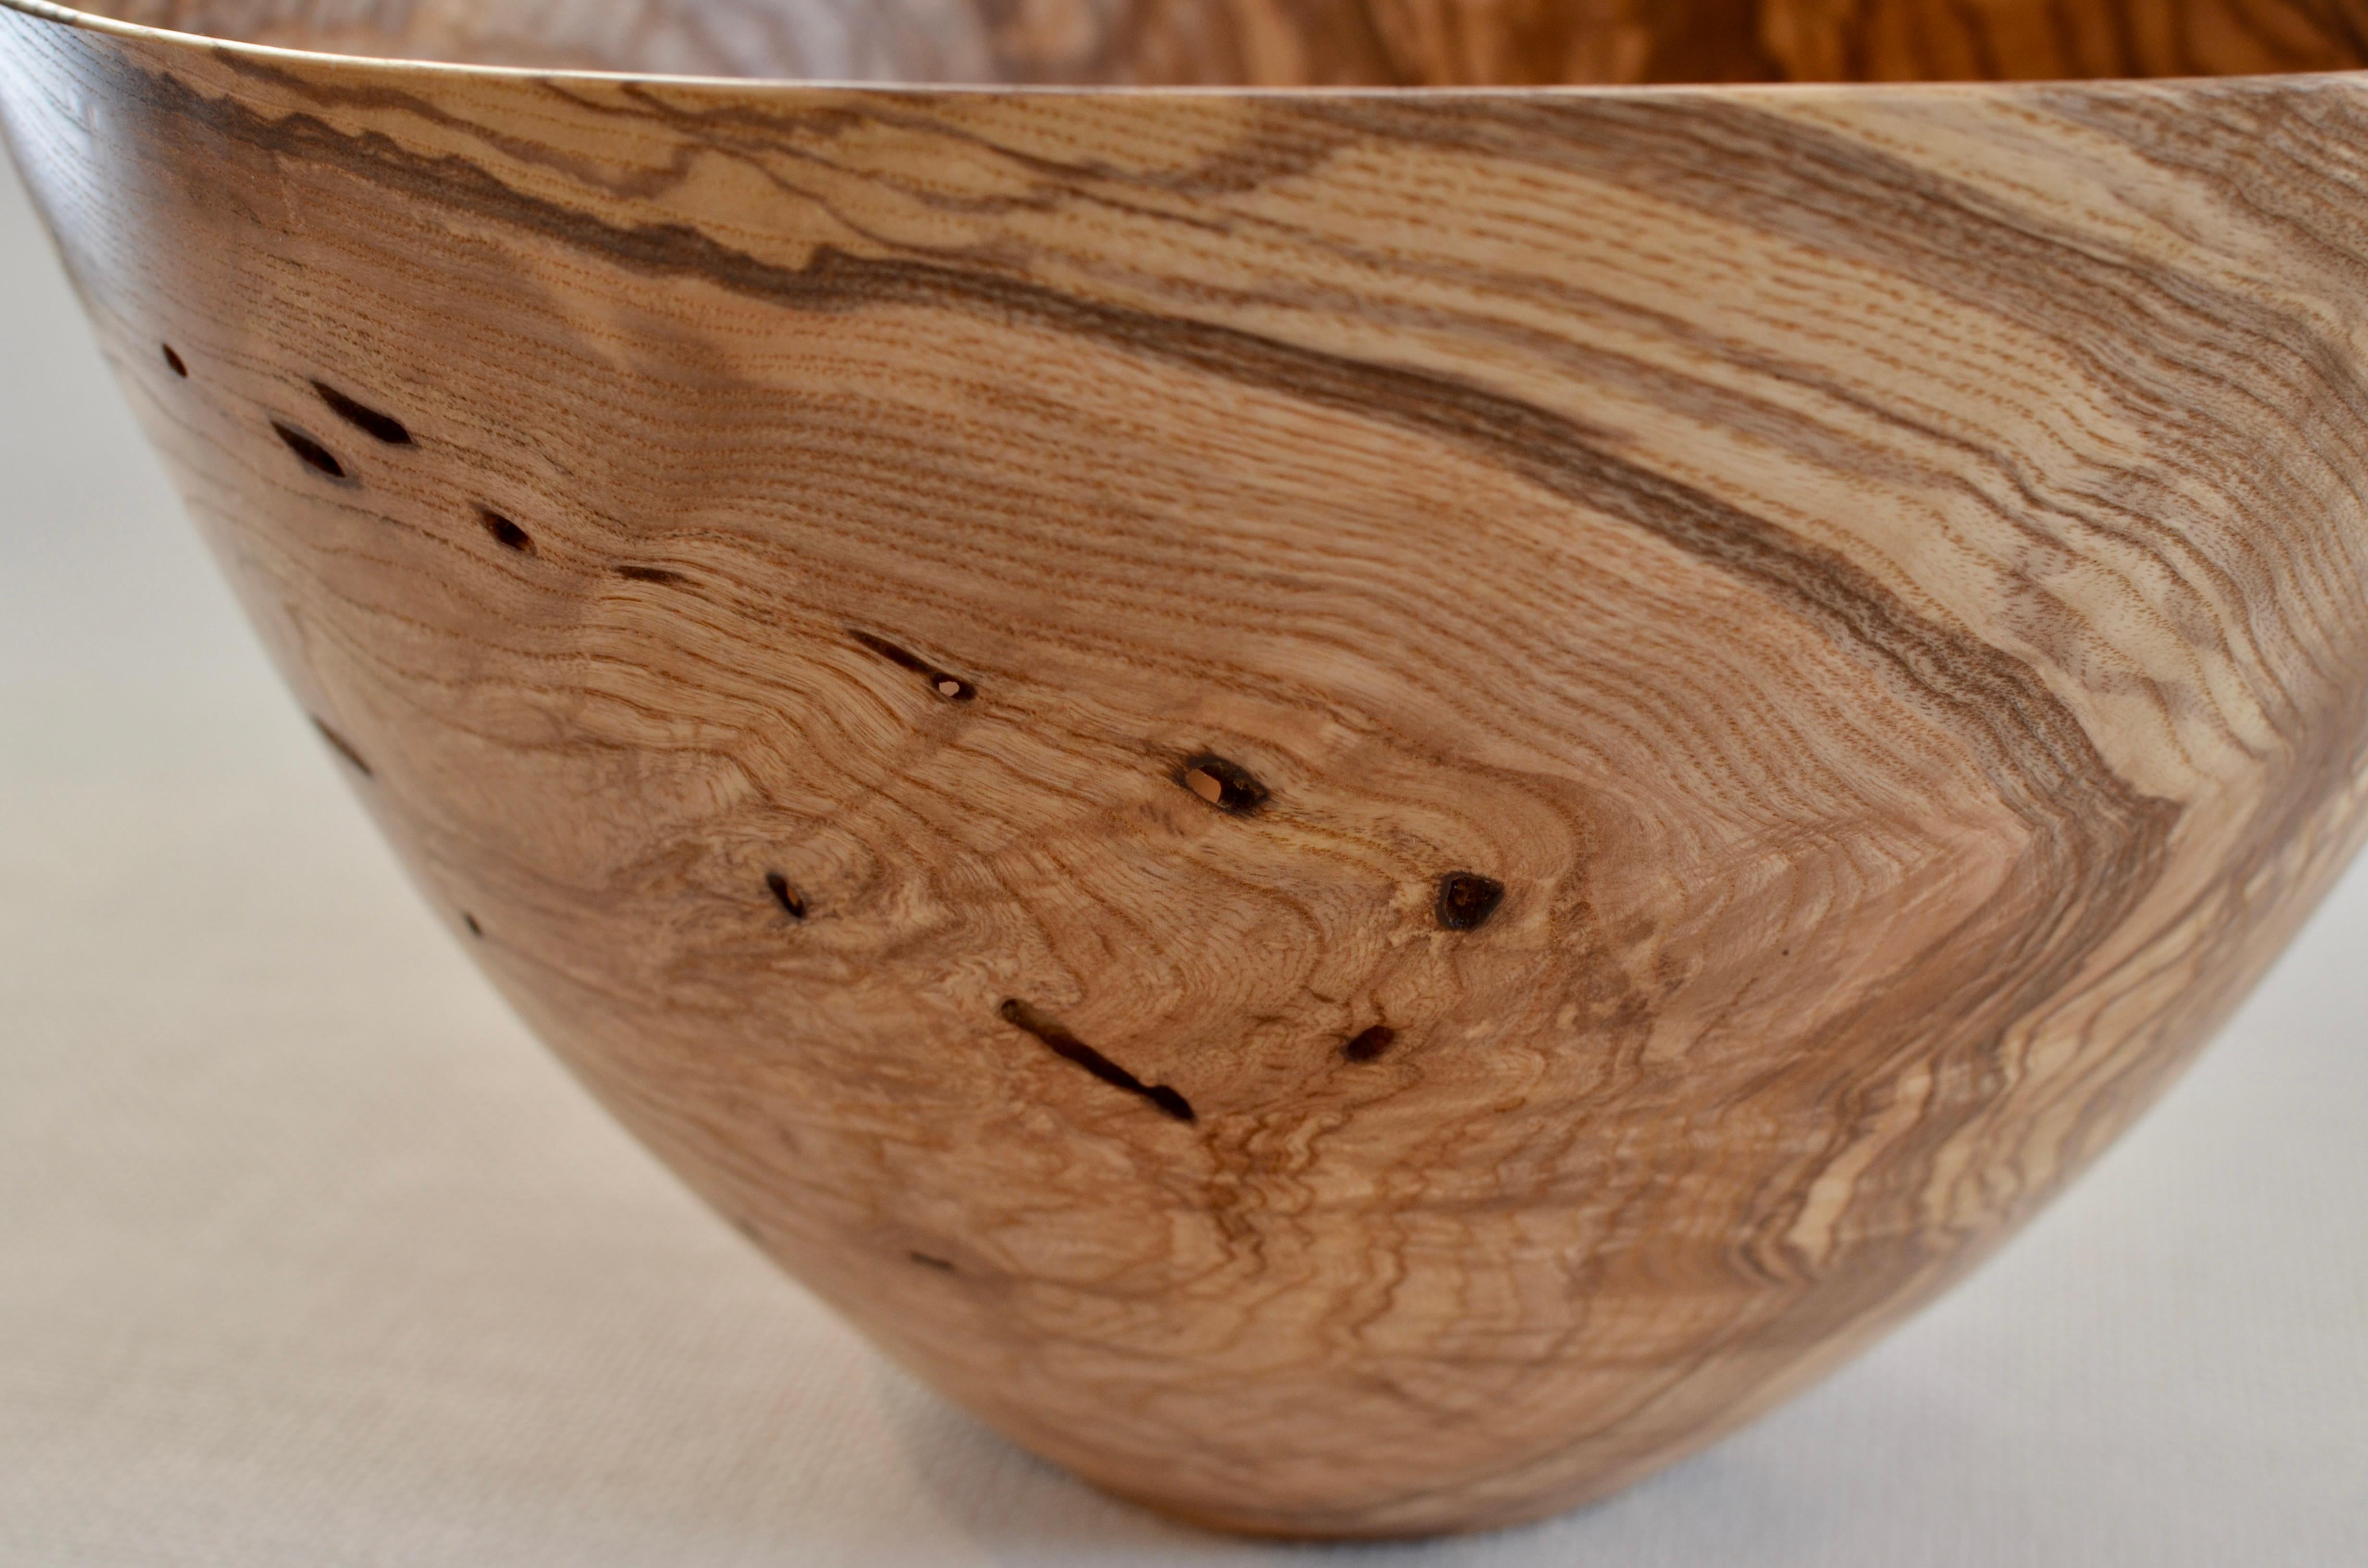 Hand-carved, oiled 100-year-old Ash wood bowl with natural grain & holes. Created using wood only from fallen Ash trees. One of a kind.
     